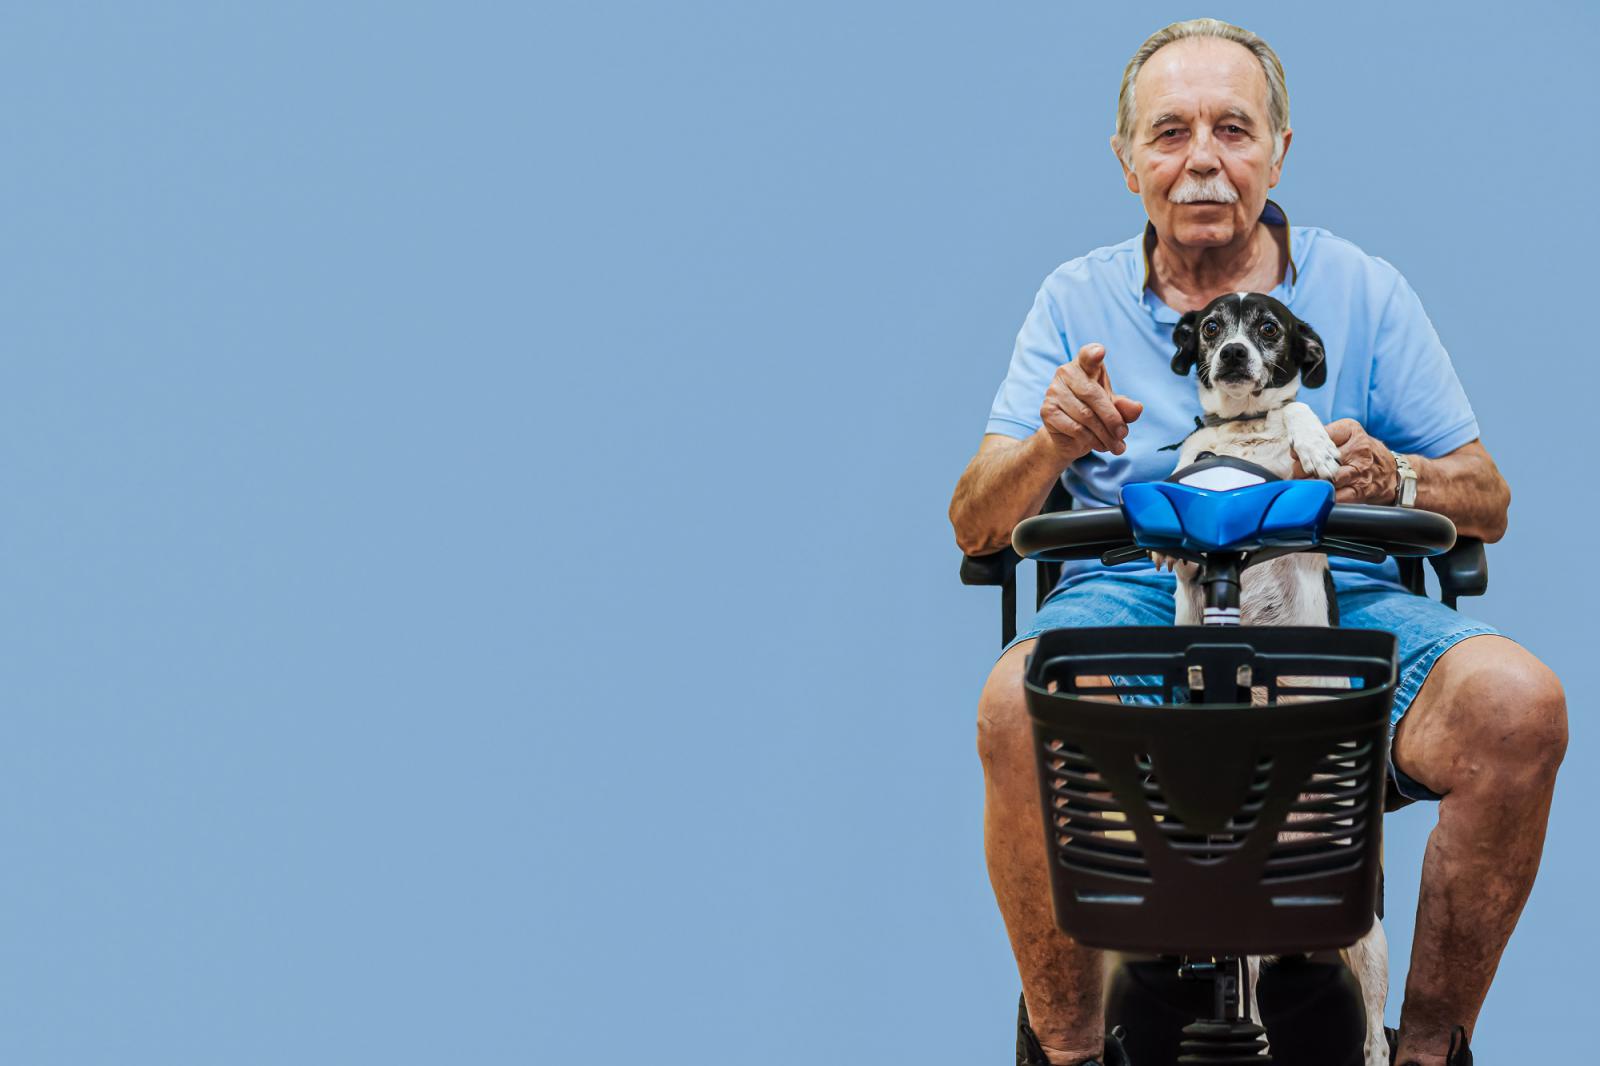 Image of an elderly man sitting on a mobility scooter with his dog in front of him.